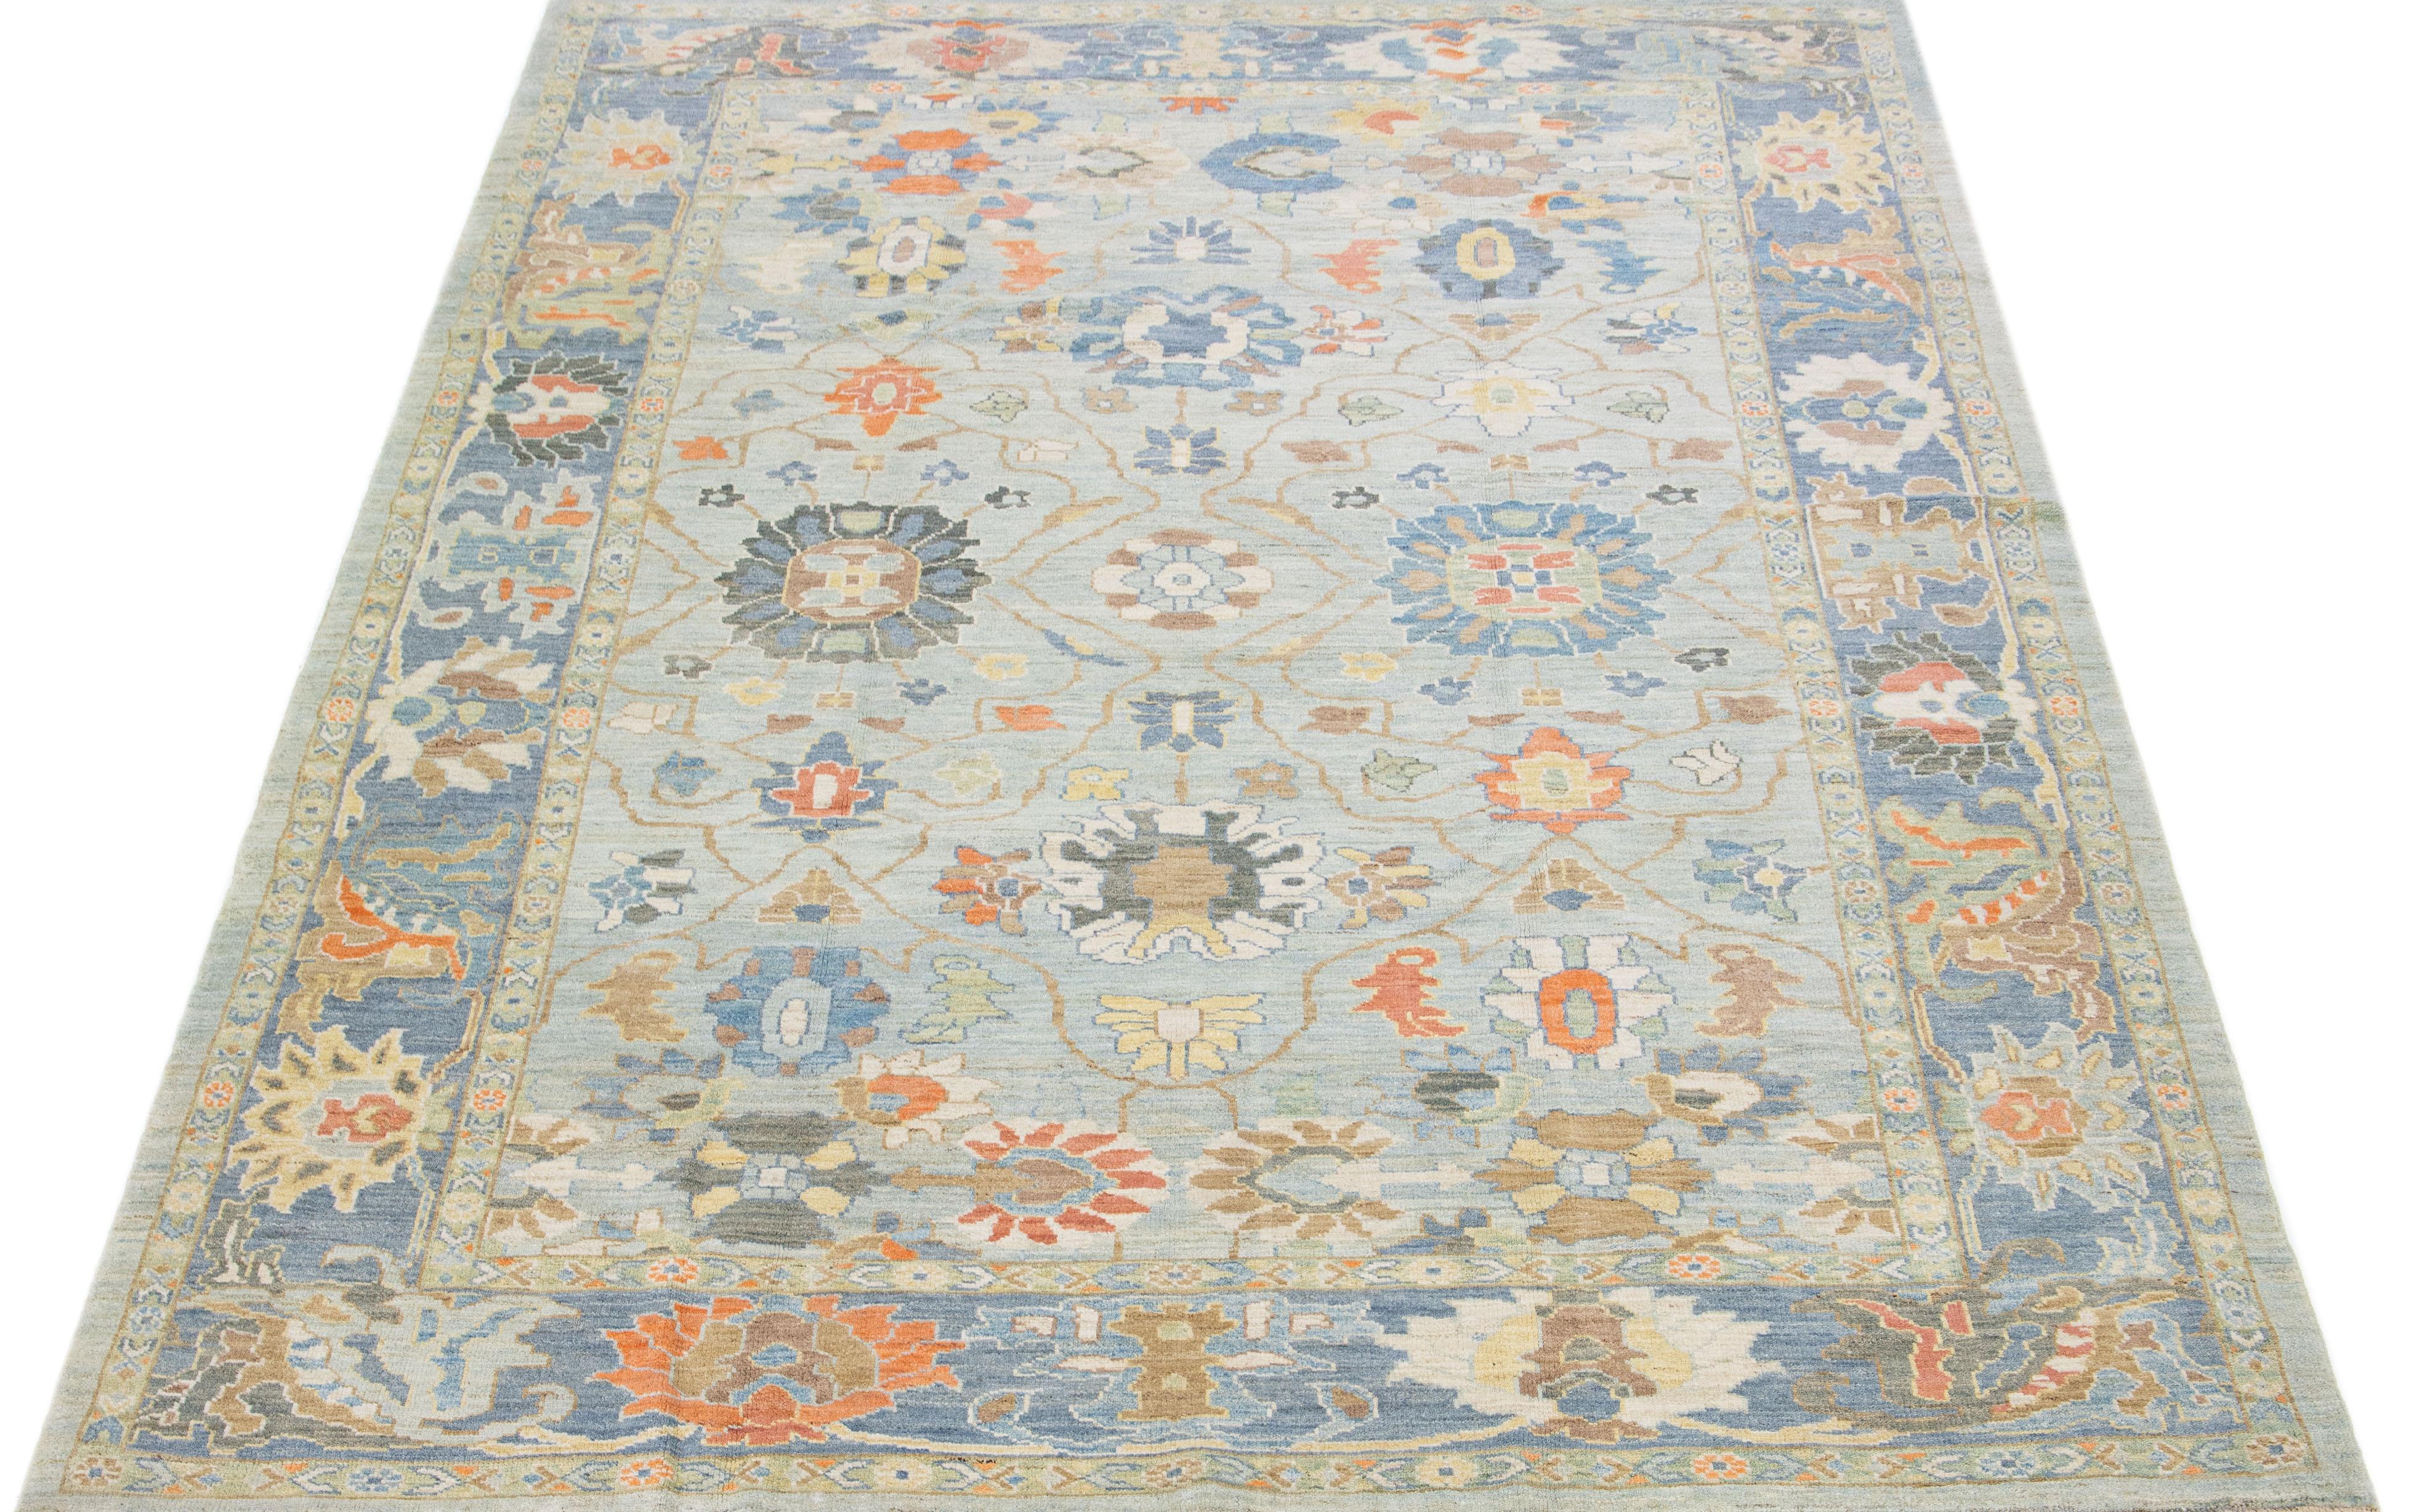 Beautiful modern Sultanabad hand knotted wool rug with a light blue color field. This rug has a designed frame with multicolor accents in a gorgeous all-over floral design.

This rug measures: 8'8